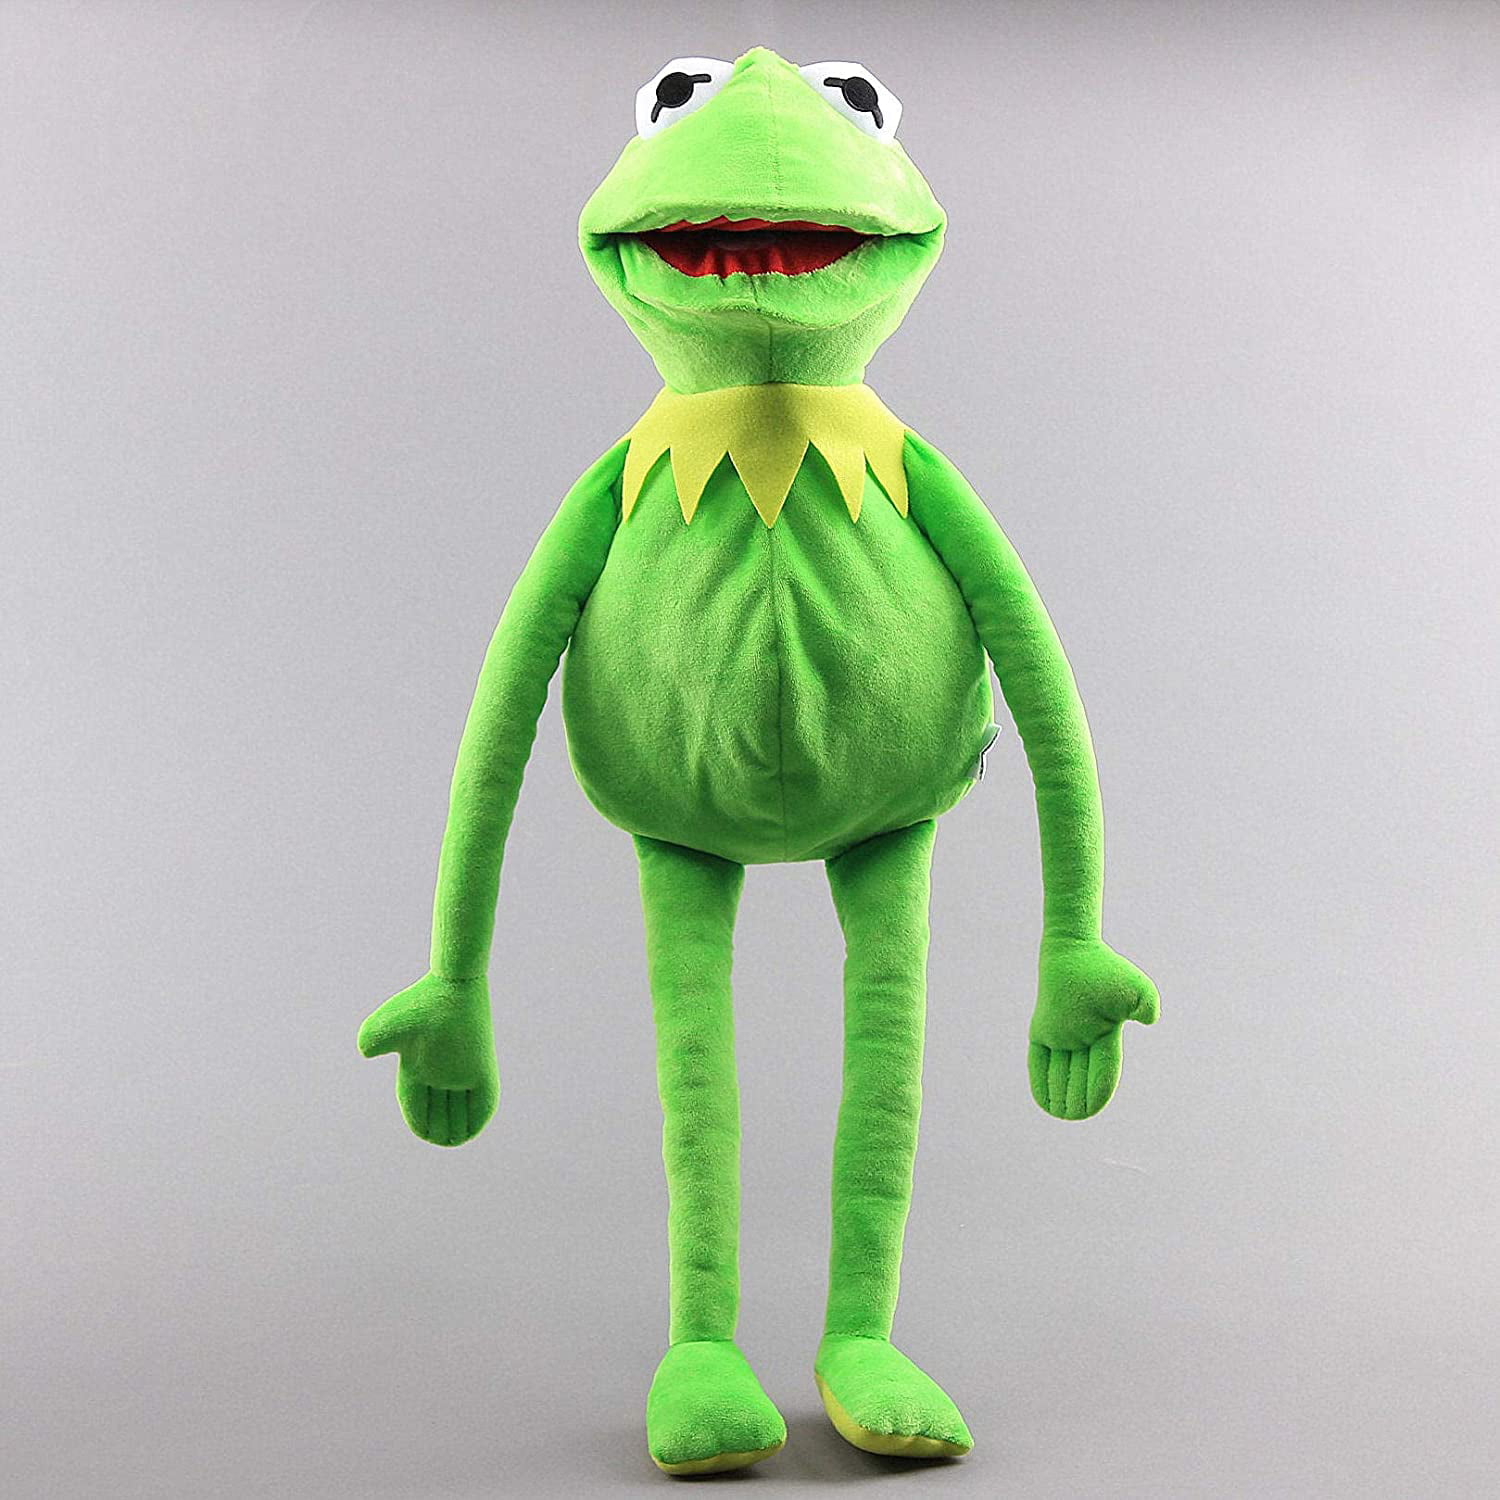 Kermit the Frog Full Body soft stuffed Puppet Toy NEW